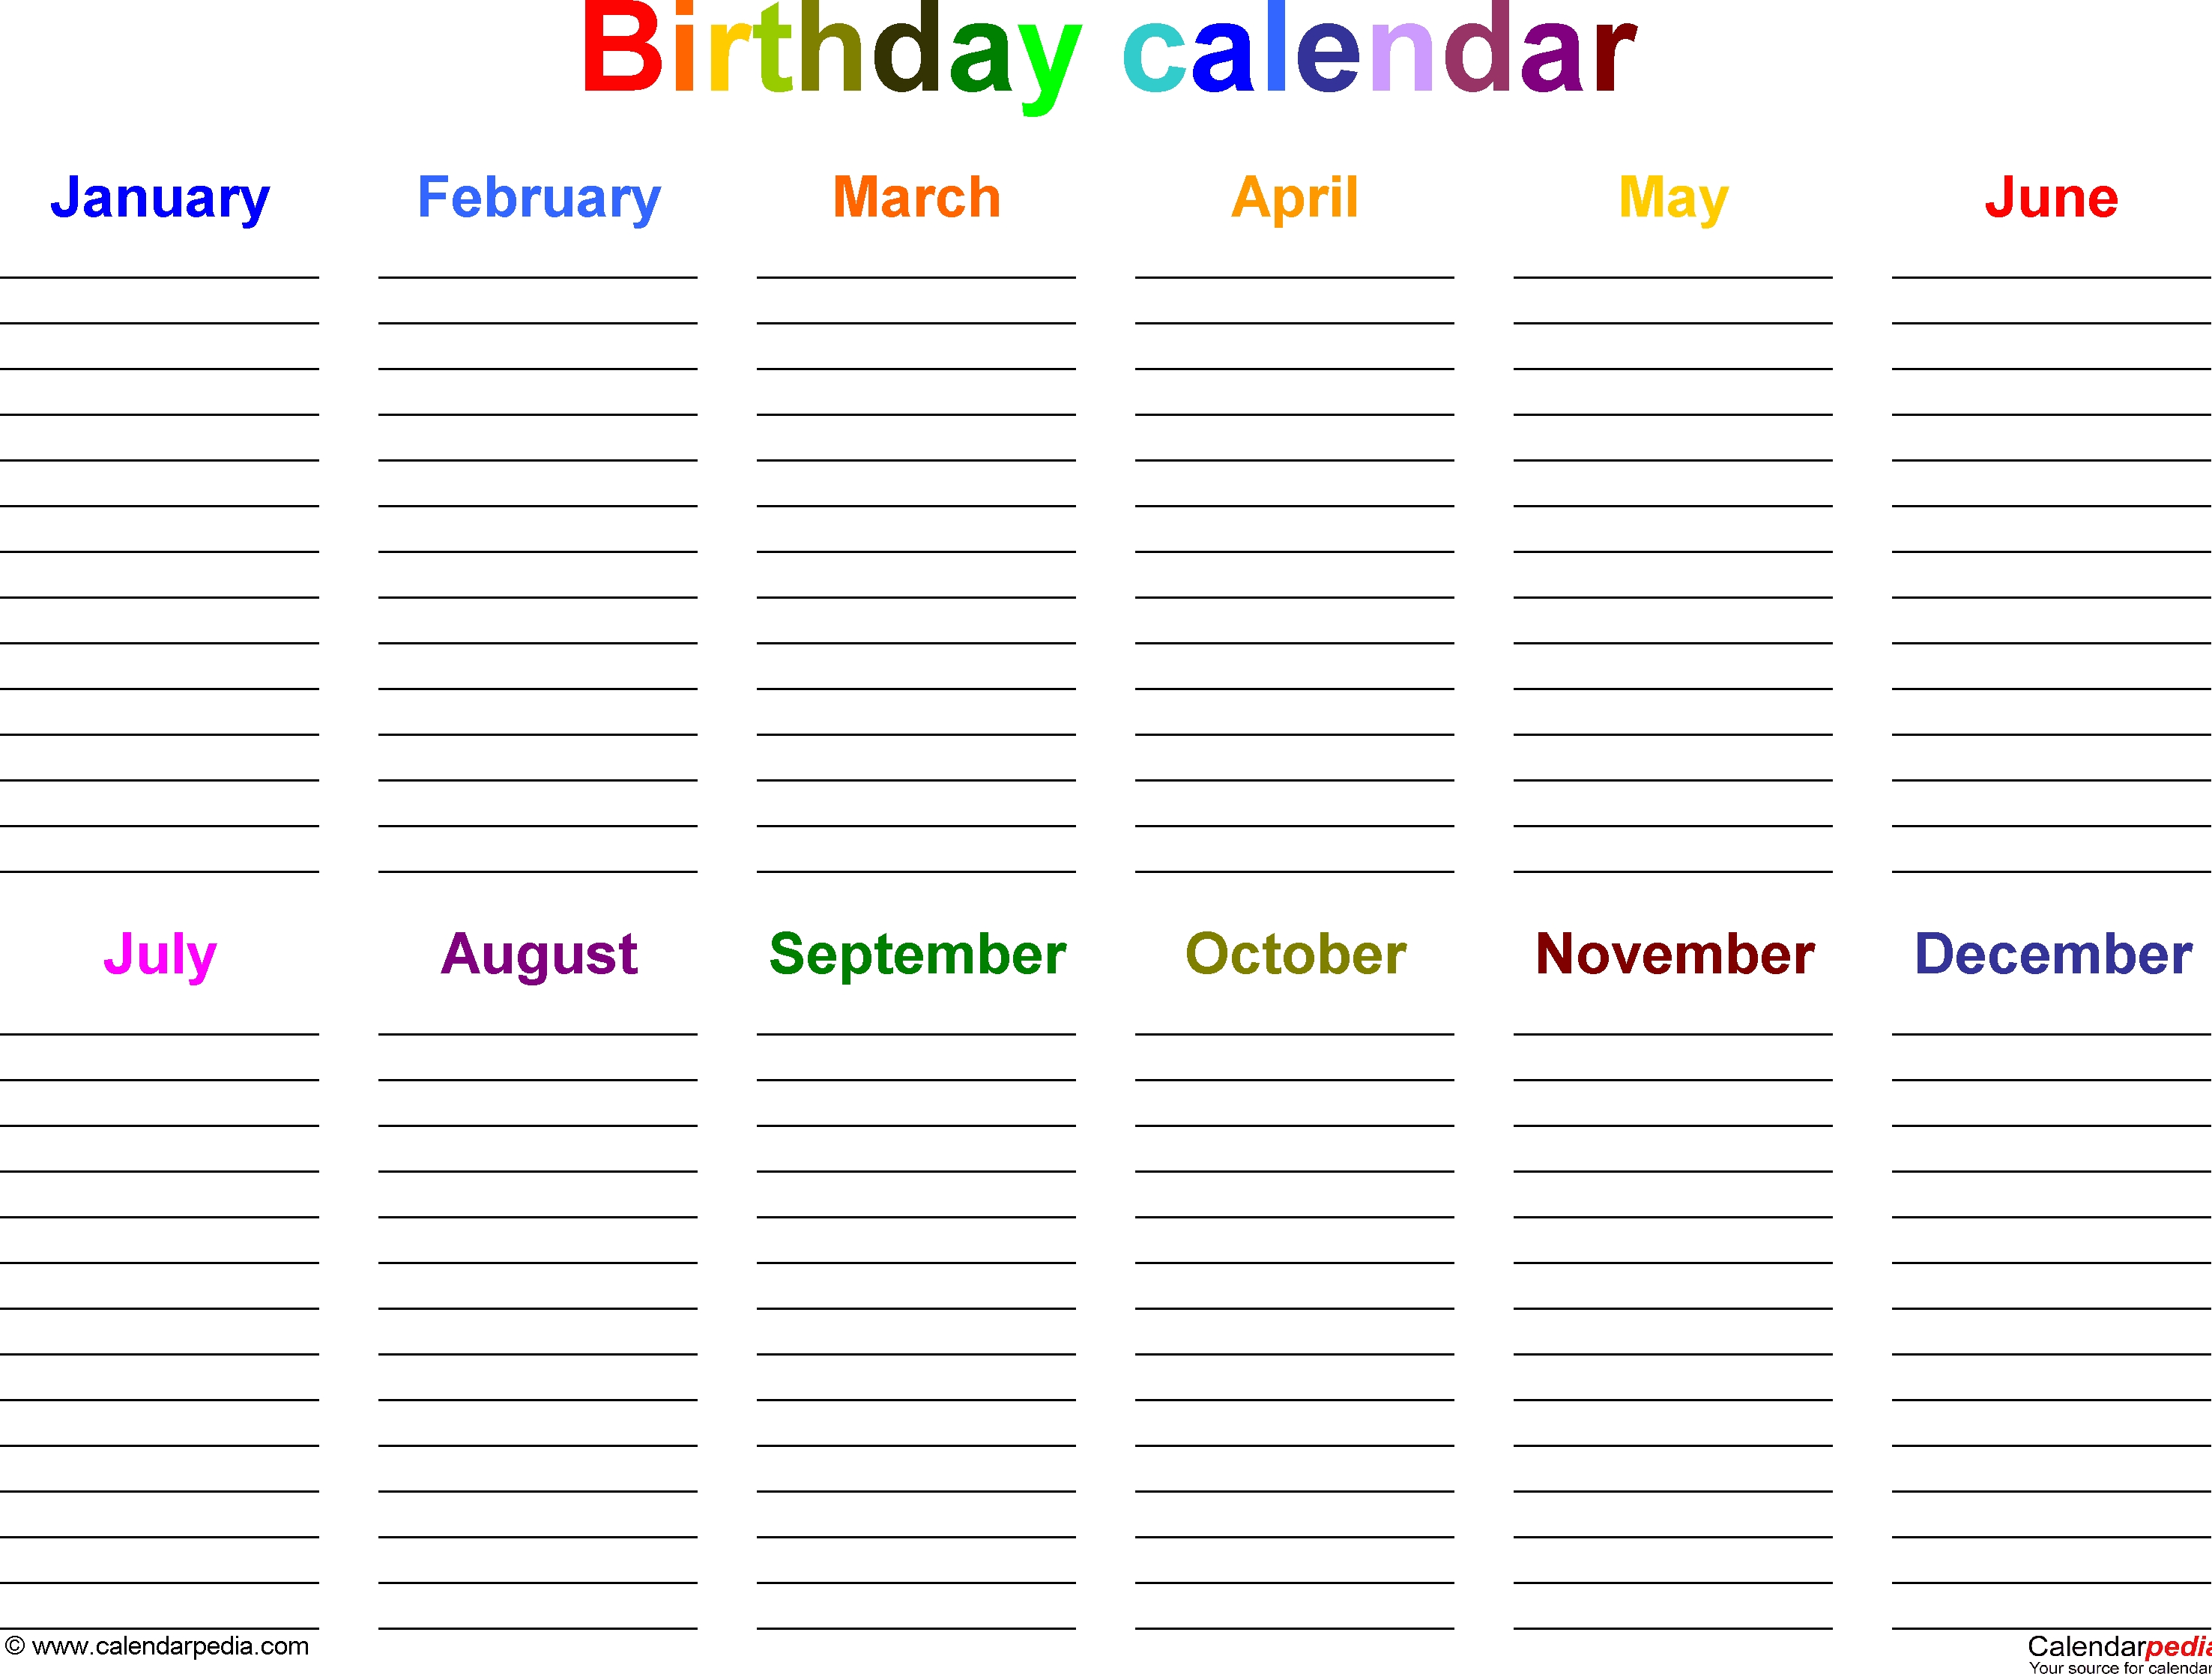 free birthday calendar for the workplace 29